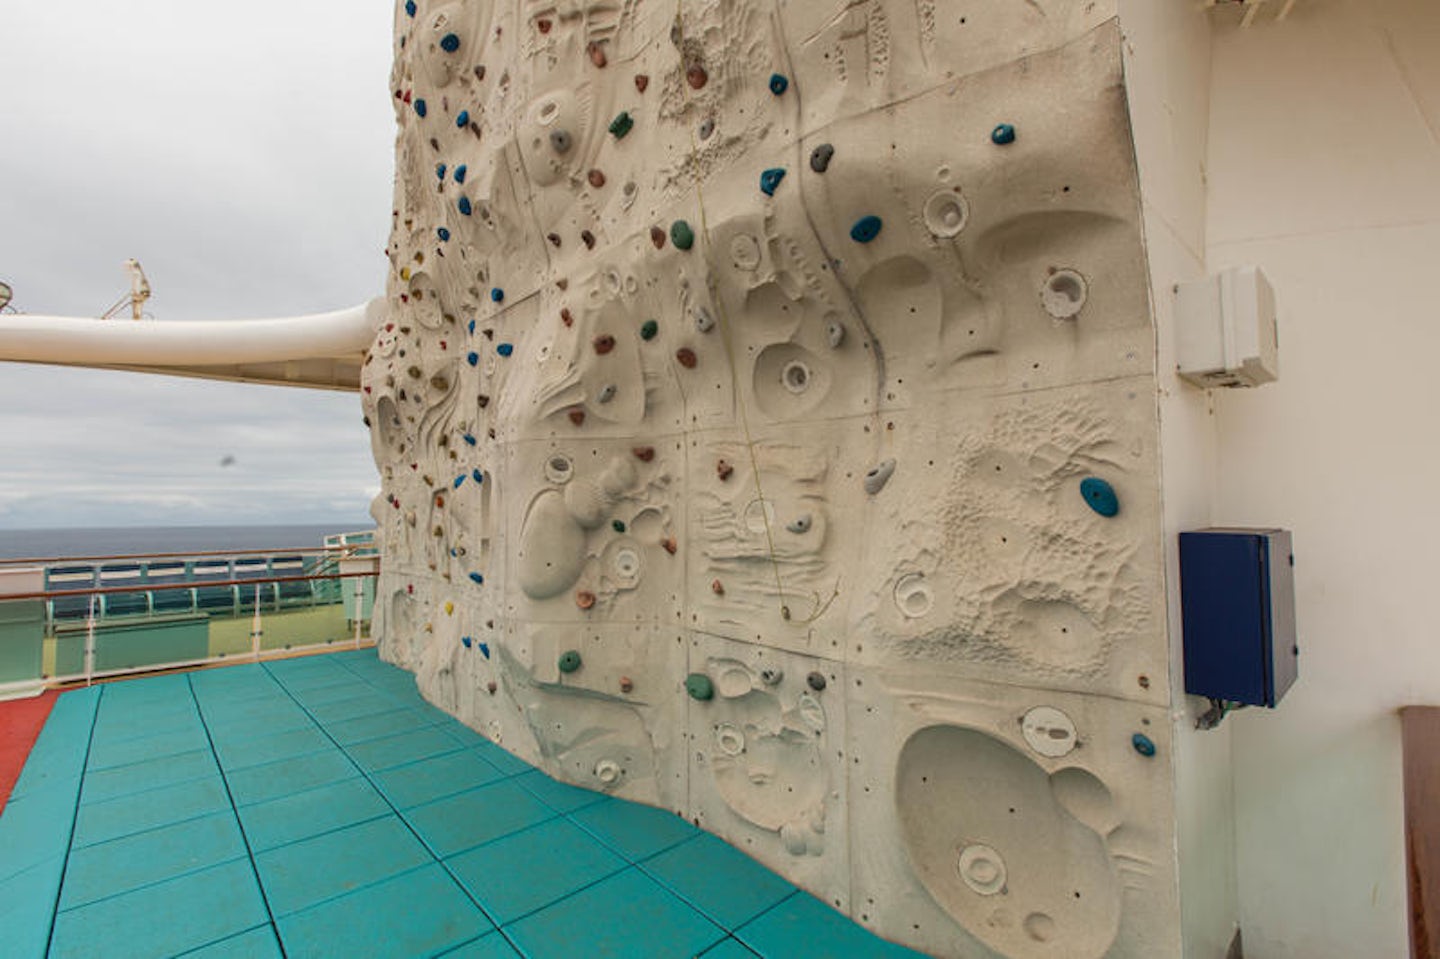 Rock Climbing Wall on Radiance of the Seas